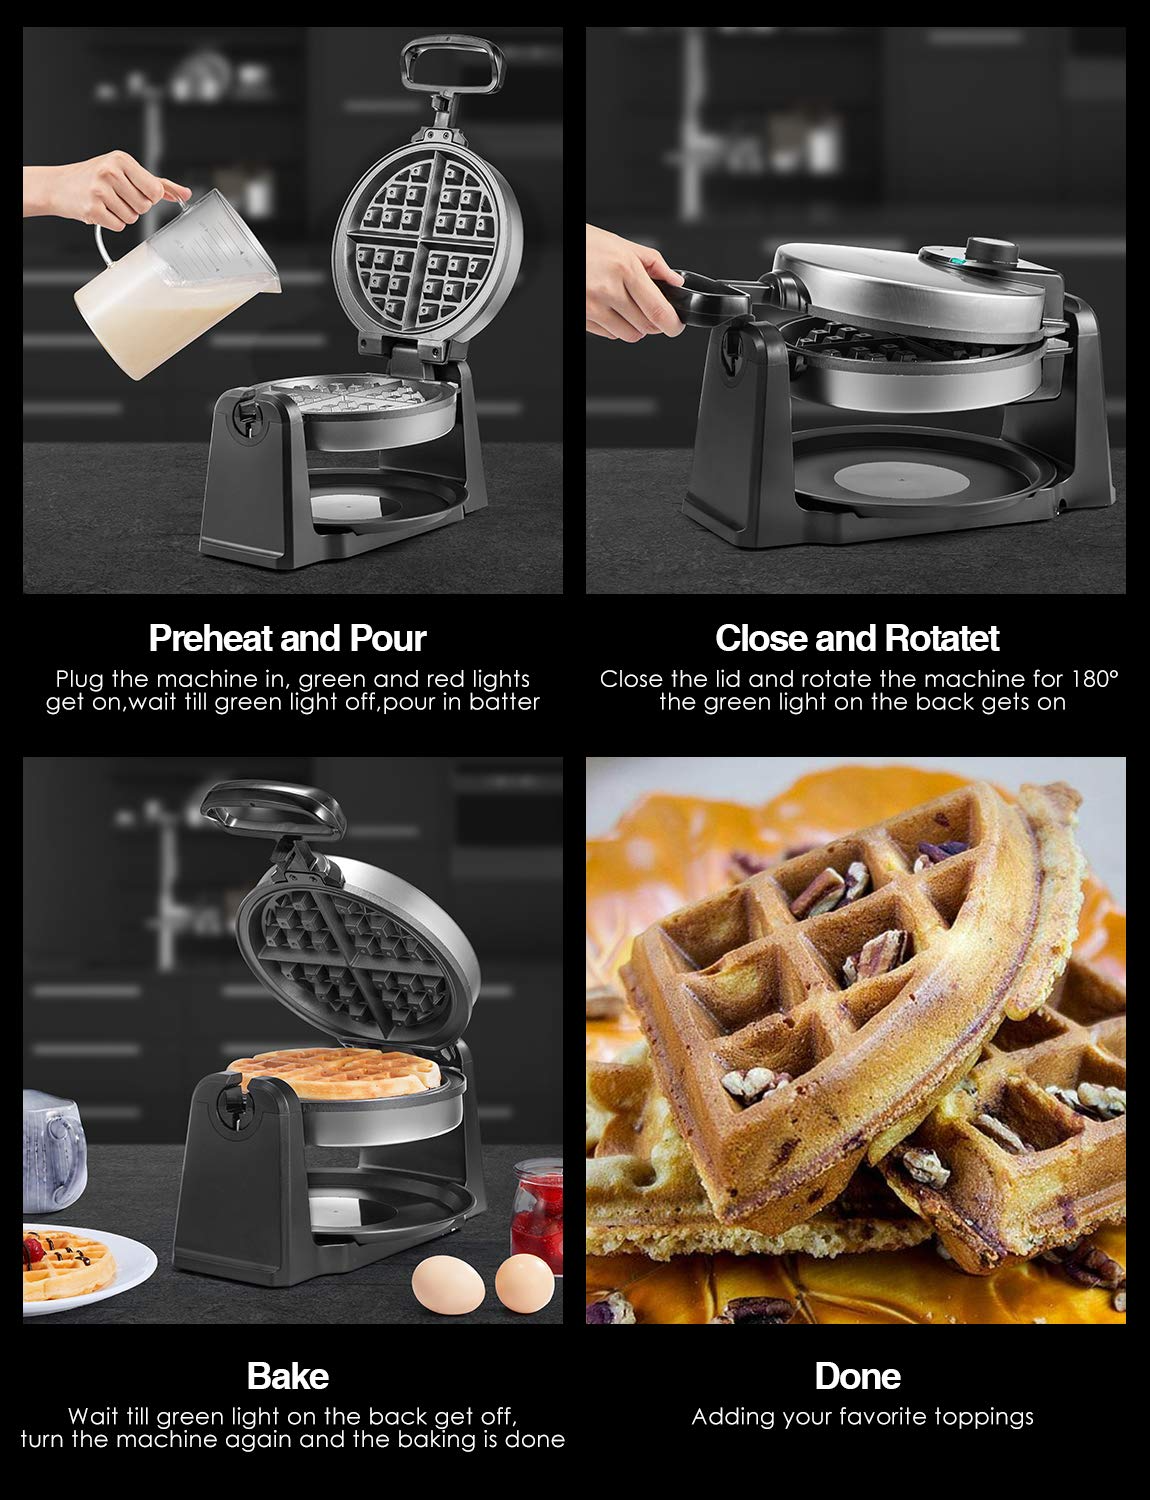 Classic Rotating Belgian Waffle Maker, 180° Flip Waffle Iron for Perfect 1  Thick Waffles, PFOA Free Nonstick Plates & Removable Drip Tray for Easy  Clean Up, 1200W Browning Control, Stainless Steel – AICOOK